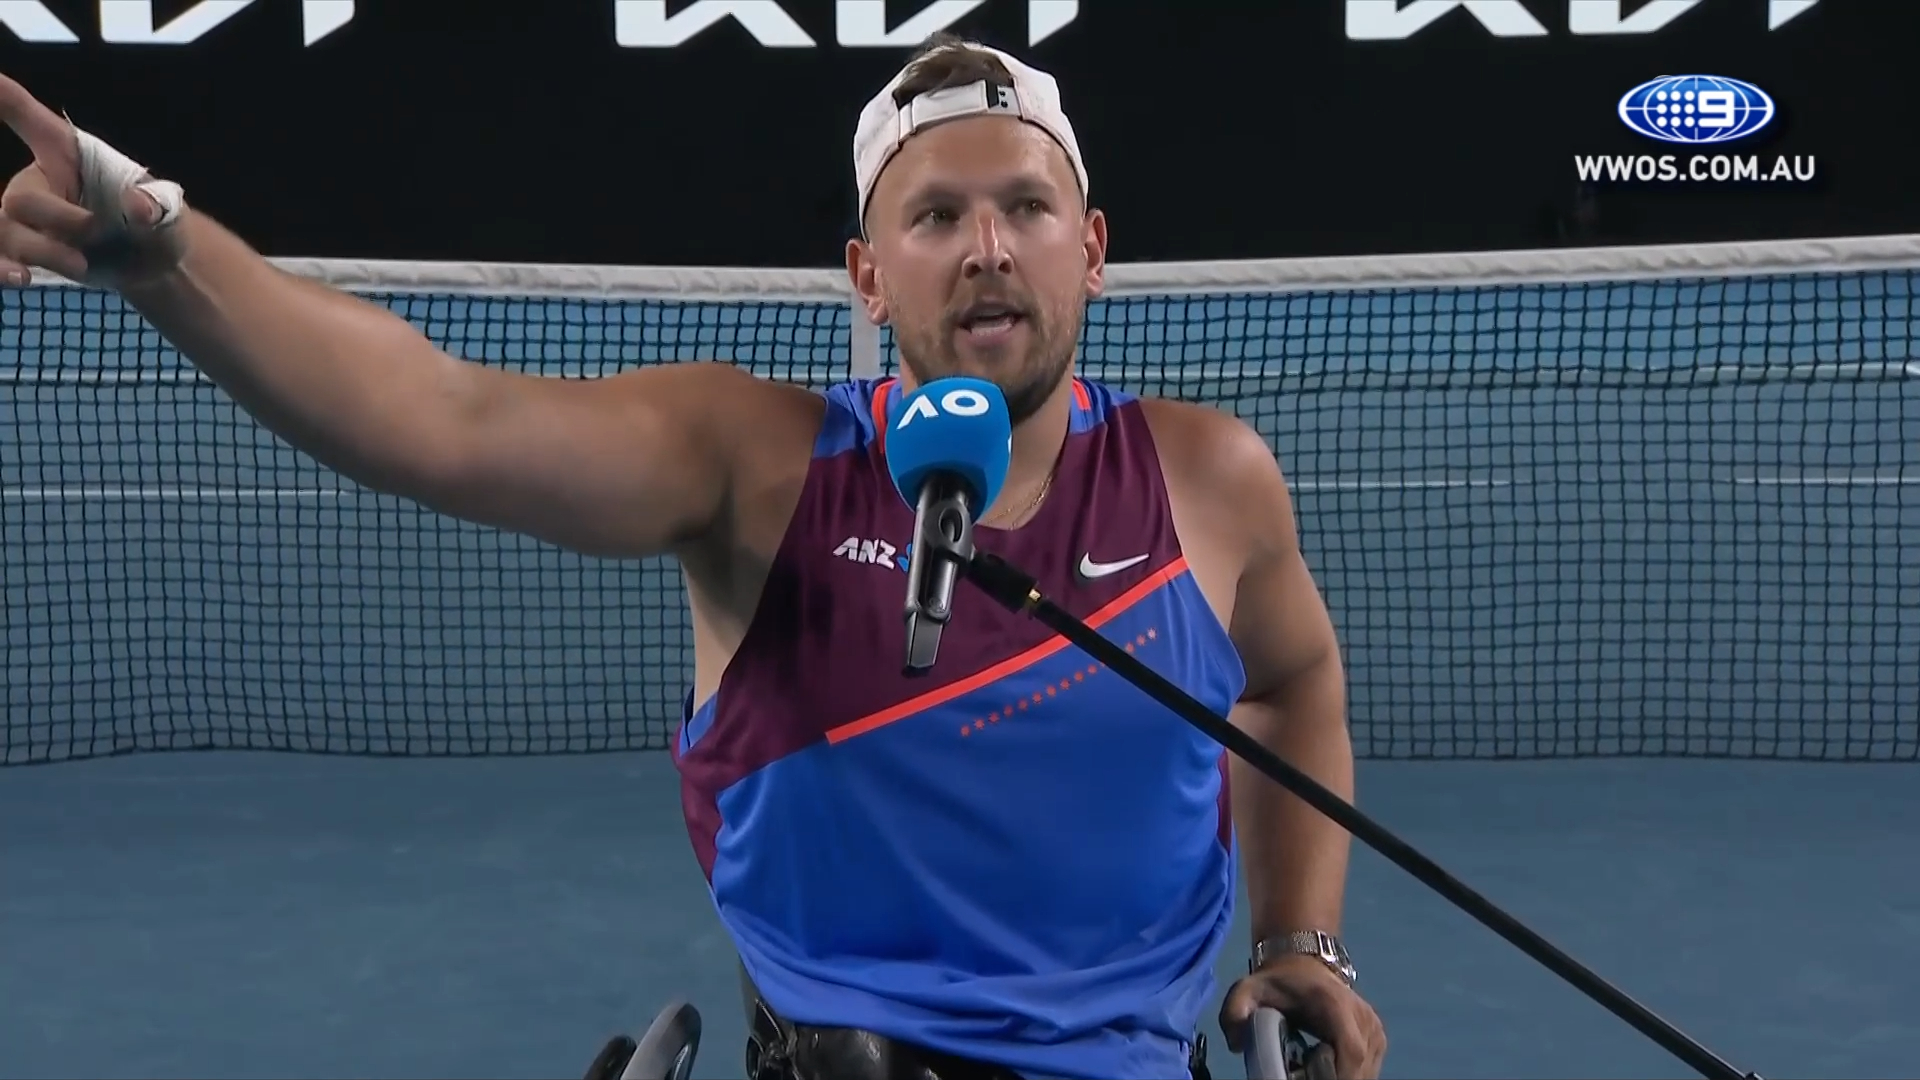 Dylan Alcott's touching tribute to his friends and family | Australian Open interviews